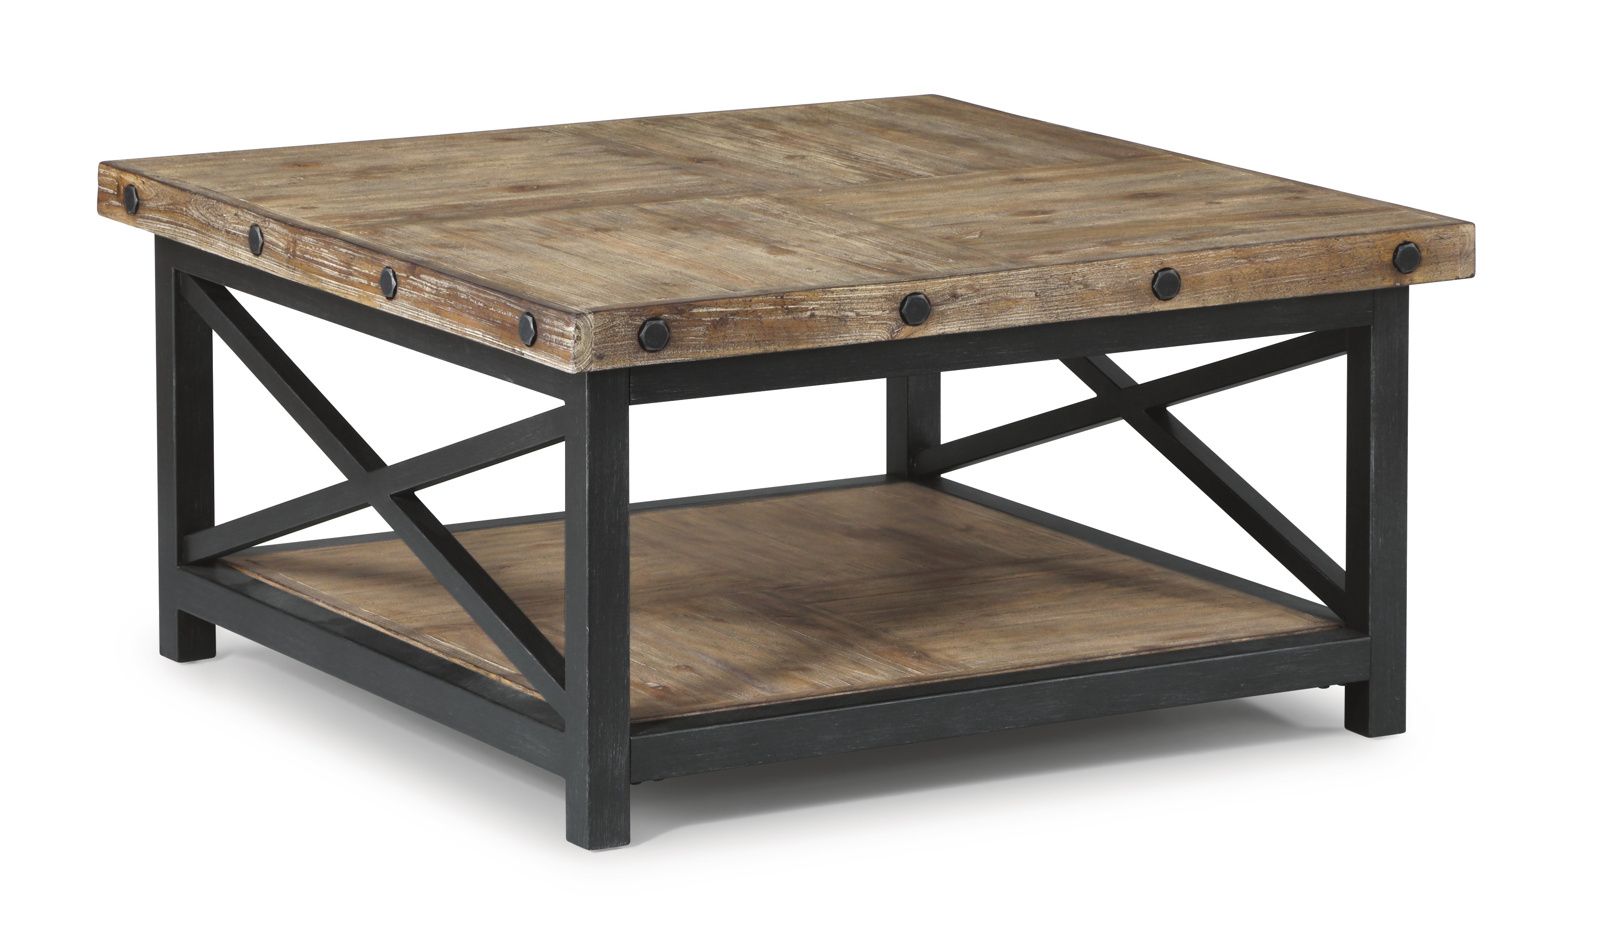 Flexsteel Carpenter Square Cocktail Table In Rustic Gray For Latest Square Cocktail Tables (View 4 of 20)